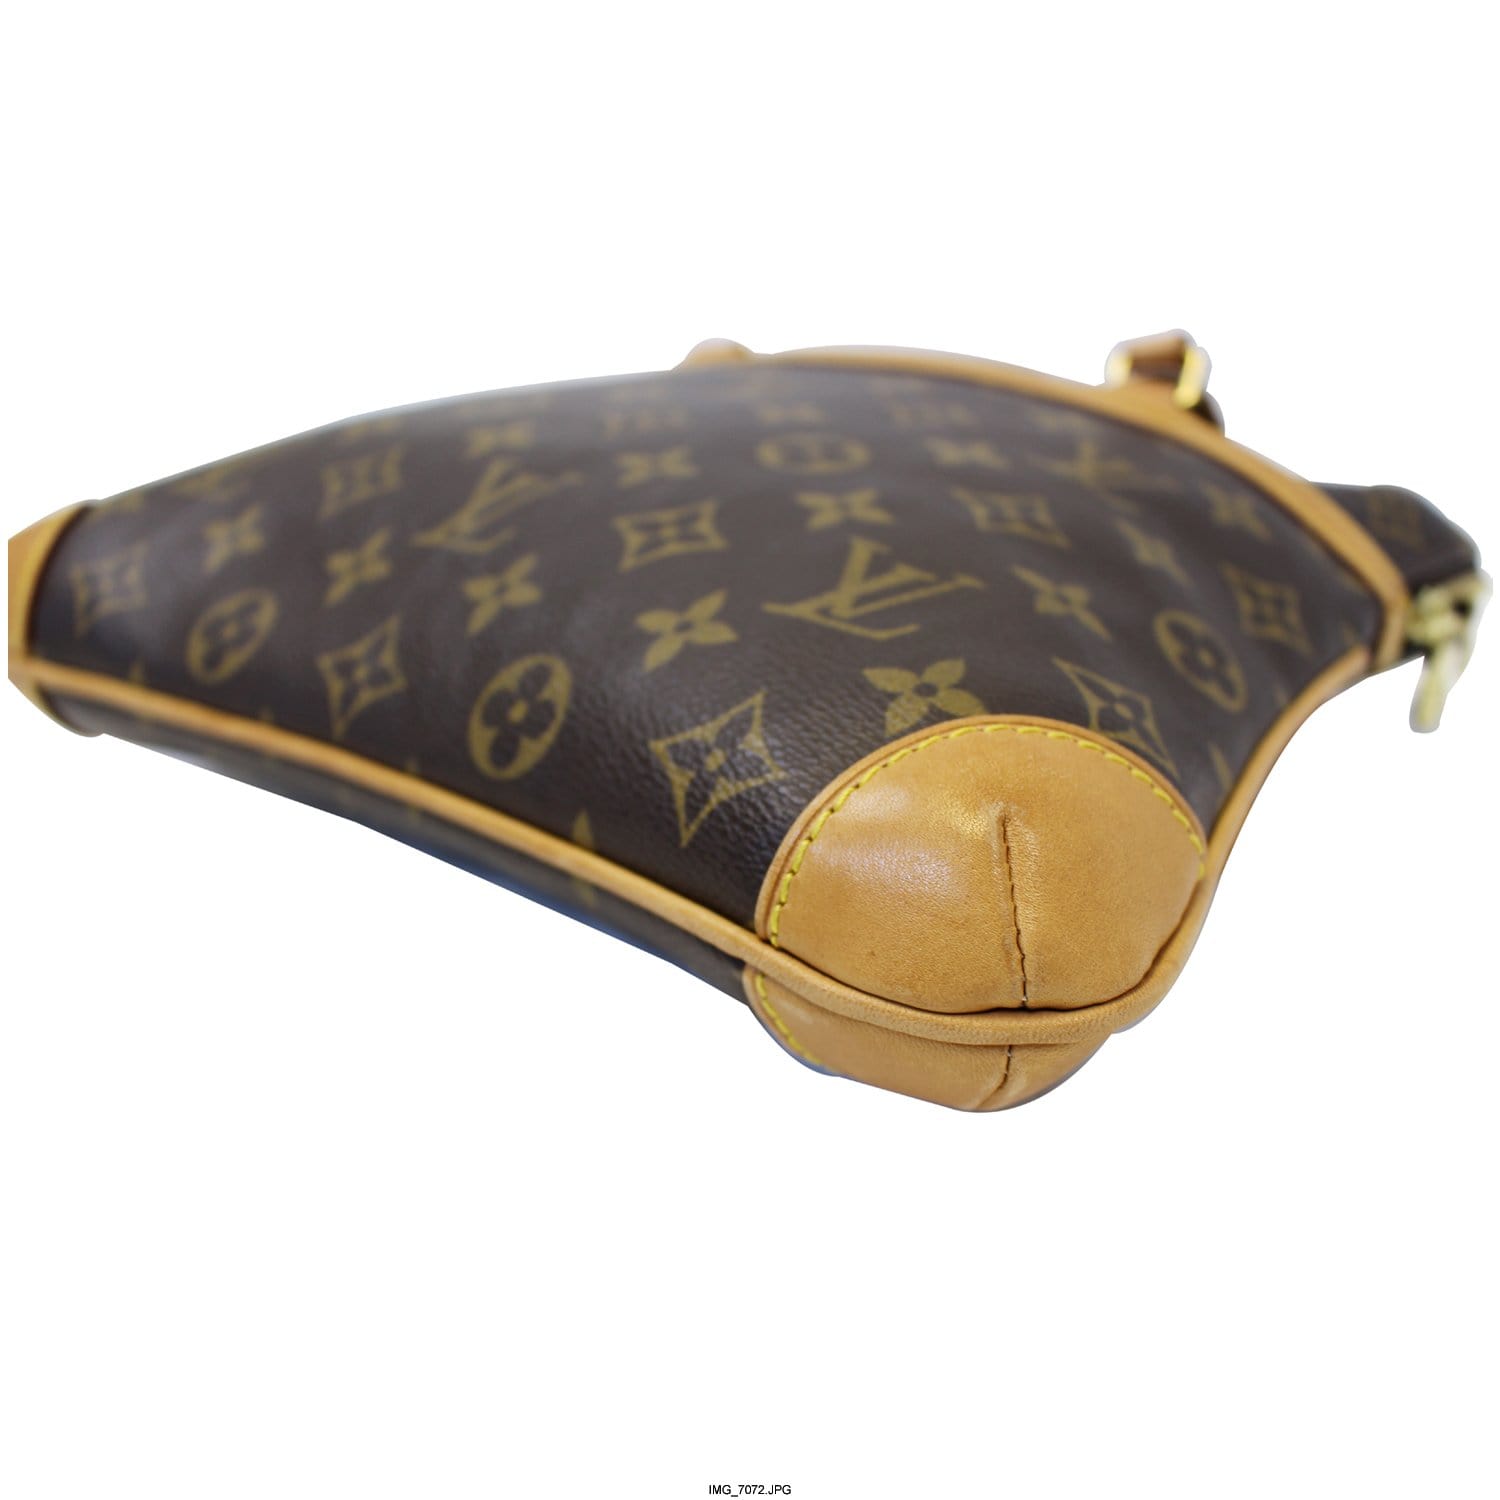 Louis vuitton coussin✨, Gallery posted by BrandnameVoyage